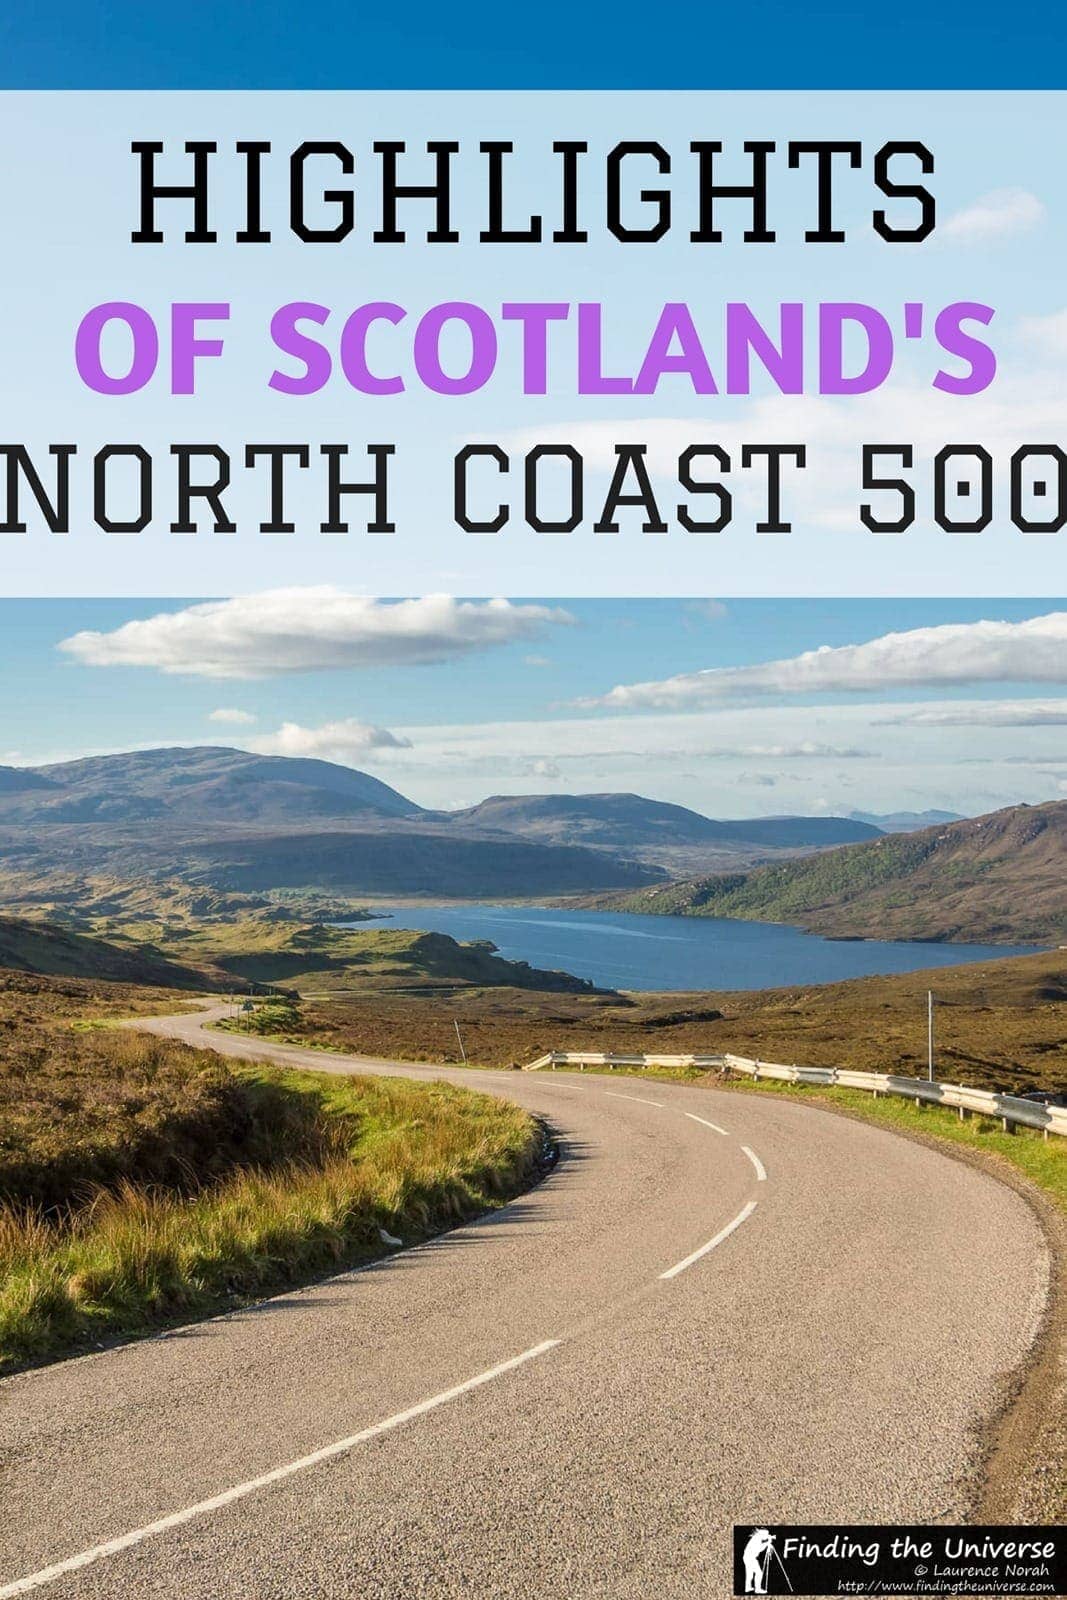 North Coast 500 - Highlights of this epic road trip including what to see, advice on where to stay, tips for making the most of your trip, and many beautiful photos from the North Coast 500 route itself!